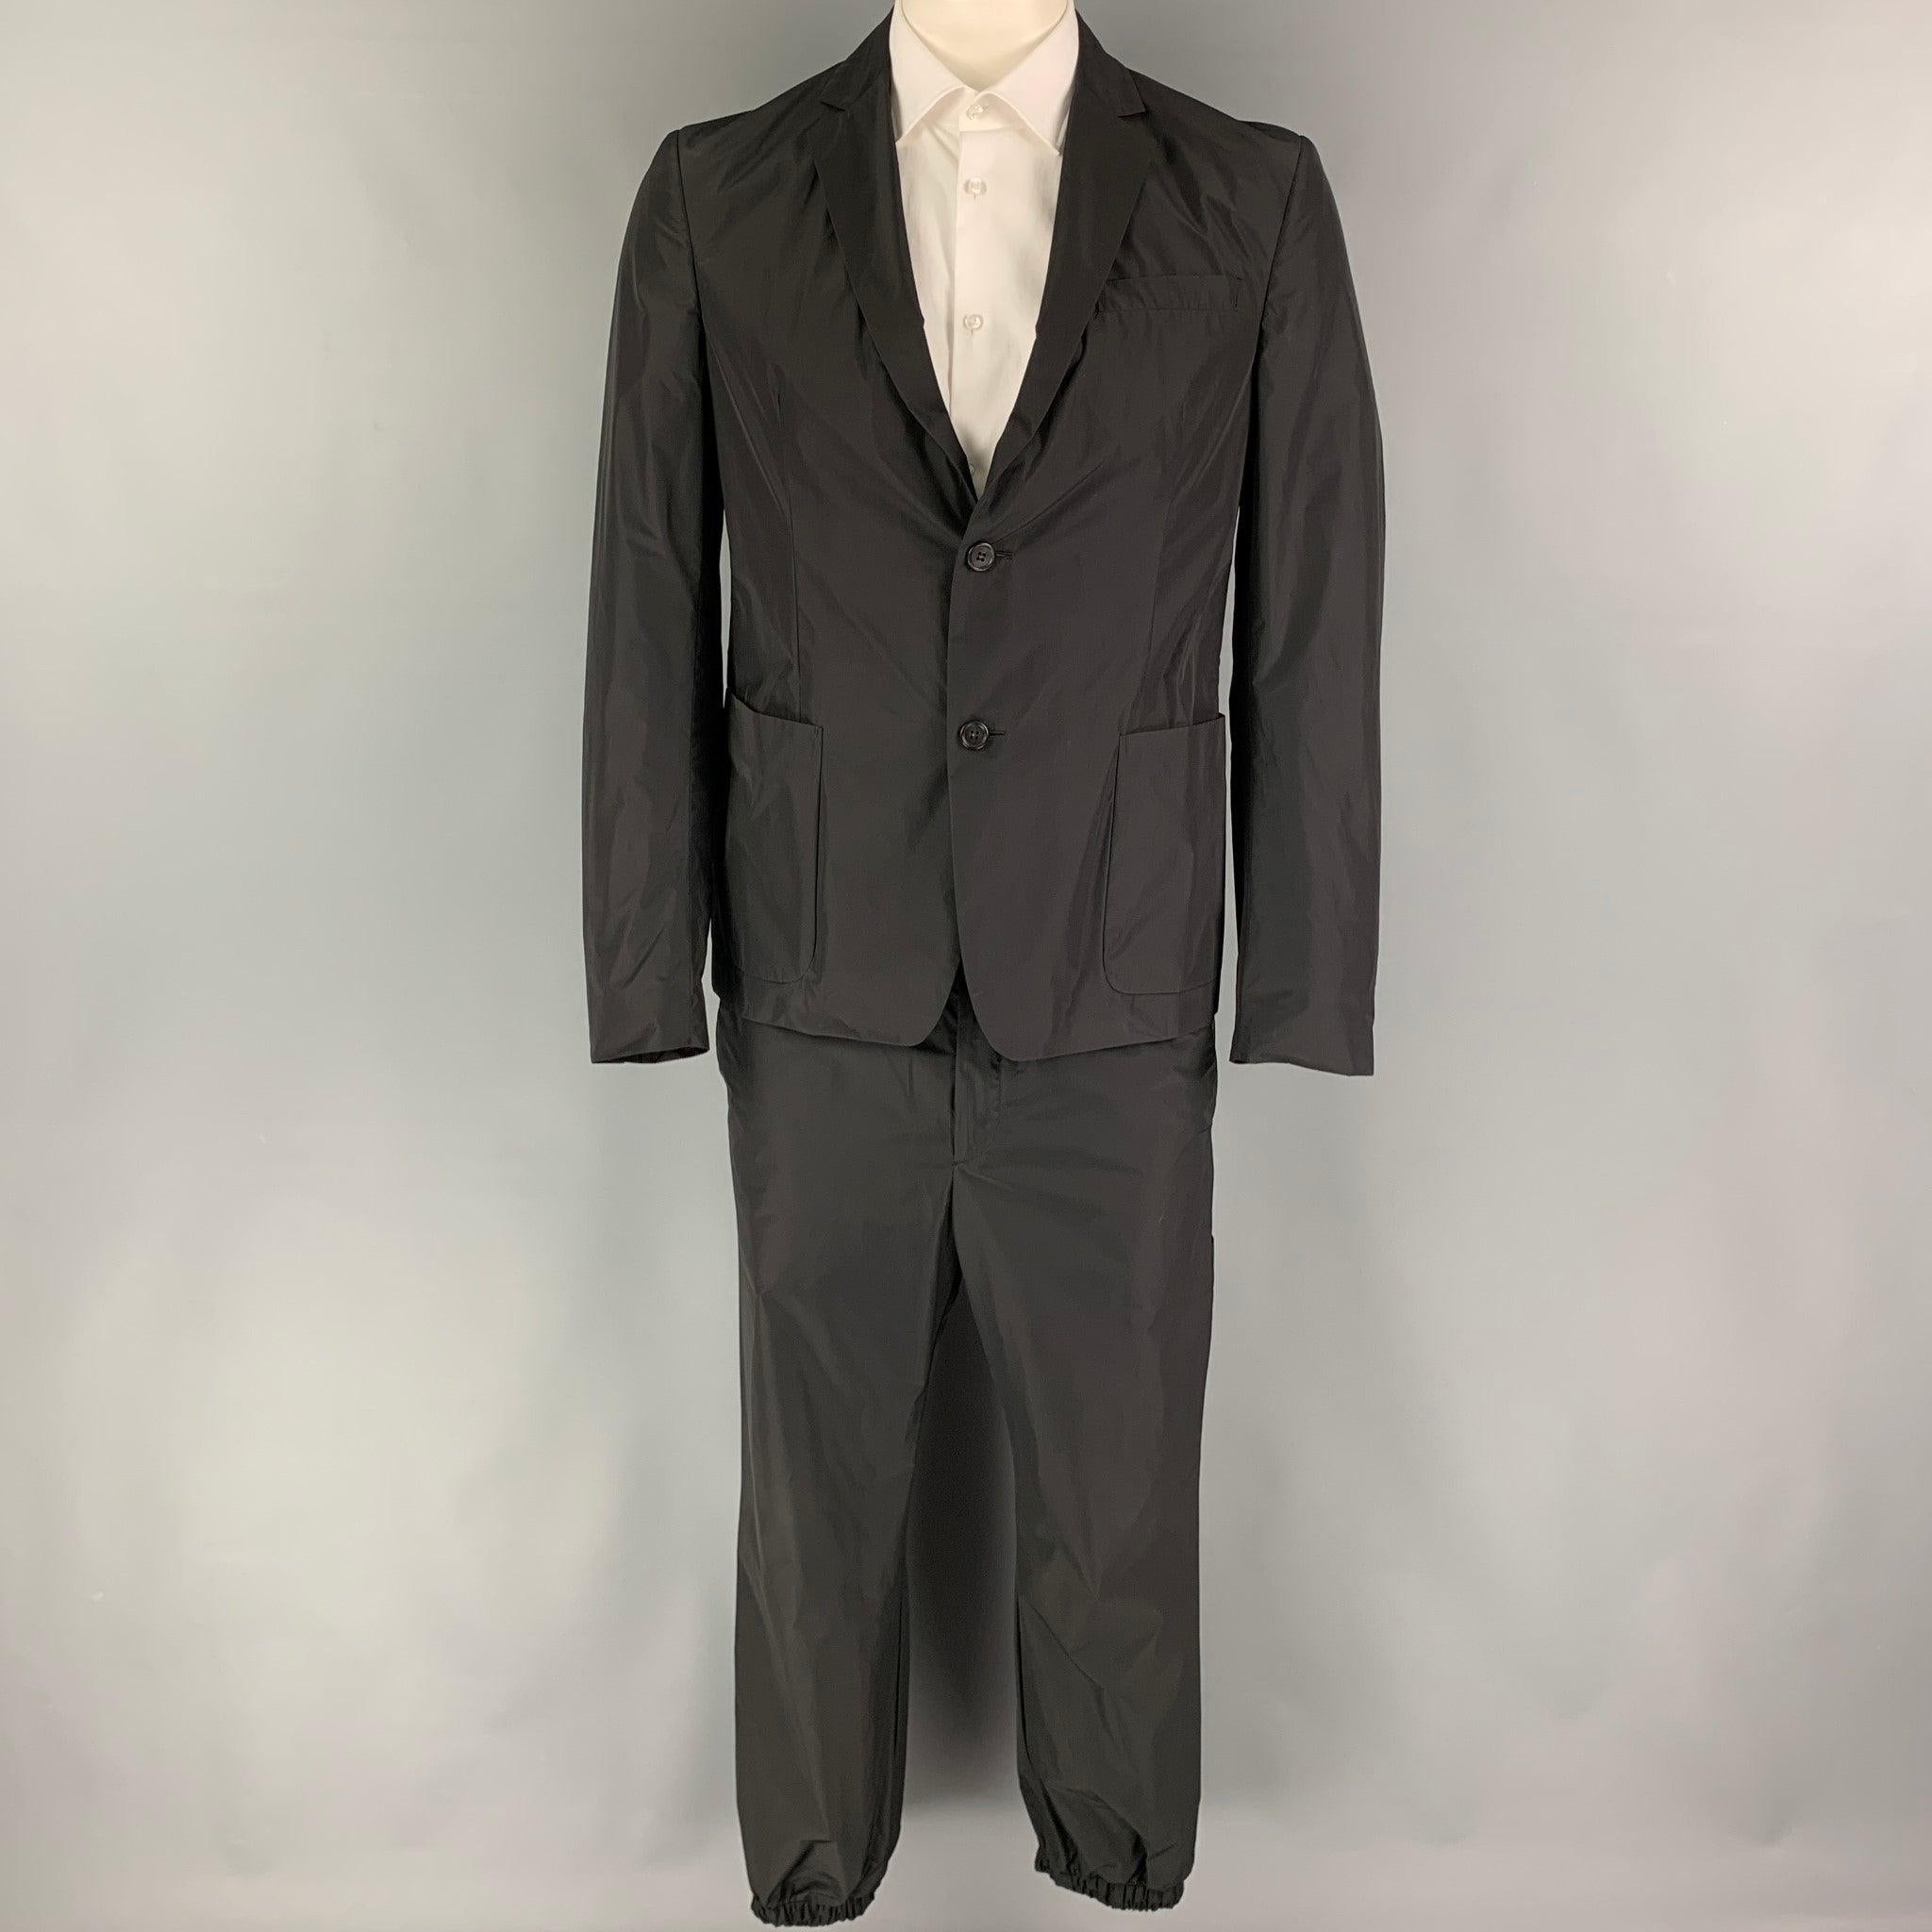 PRADA
suit comes in a black polyester with a half mesh liner and includes a single breasted, double button sport coat with a notch lapel and matching flat front pants. Excellent Pre-Owned Condition. 

Marked:   52 

Measurements: 
  -JacketShoulder: